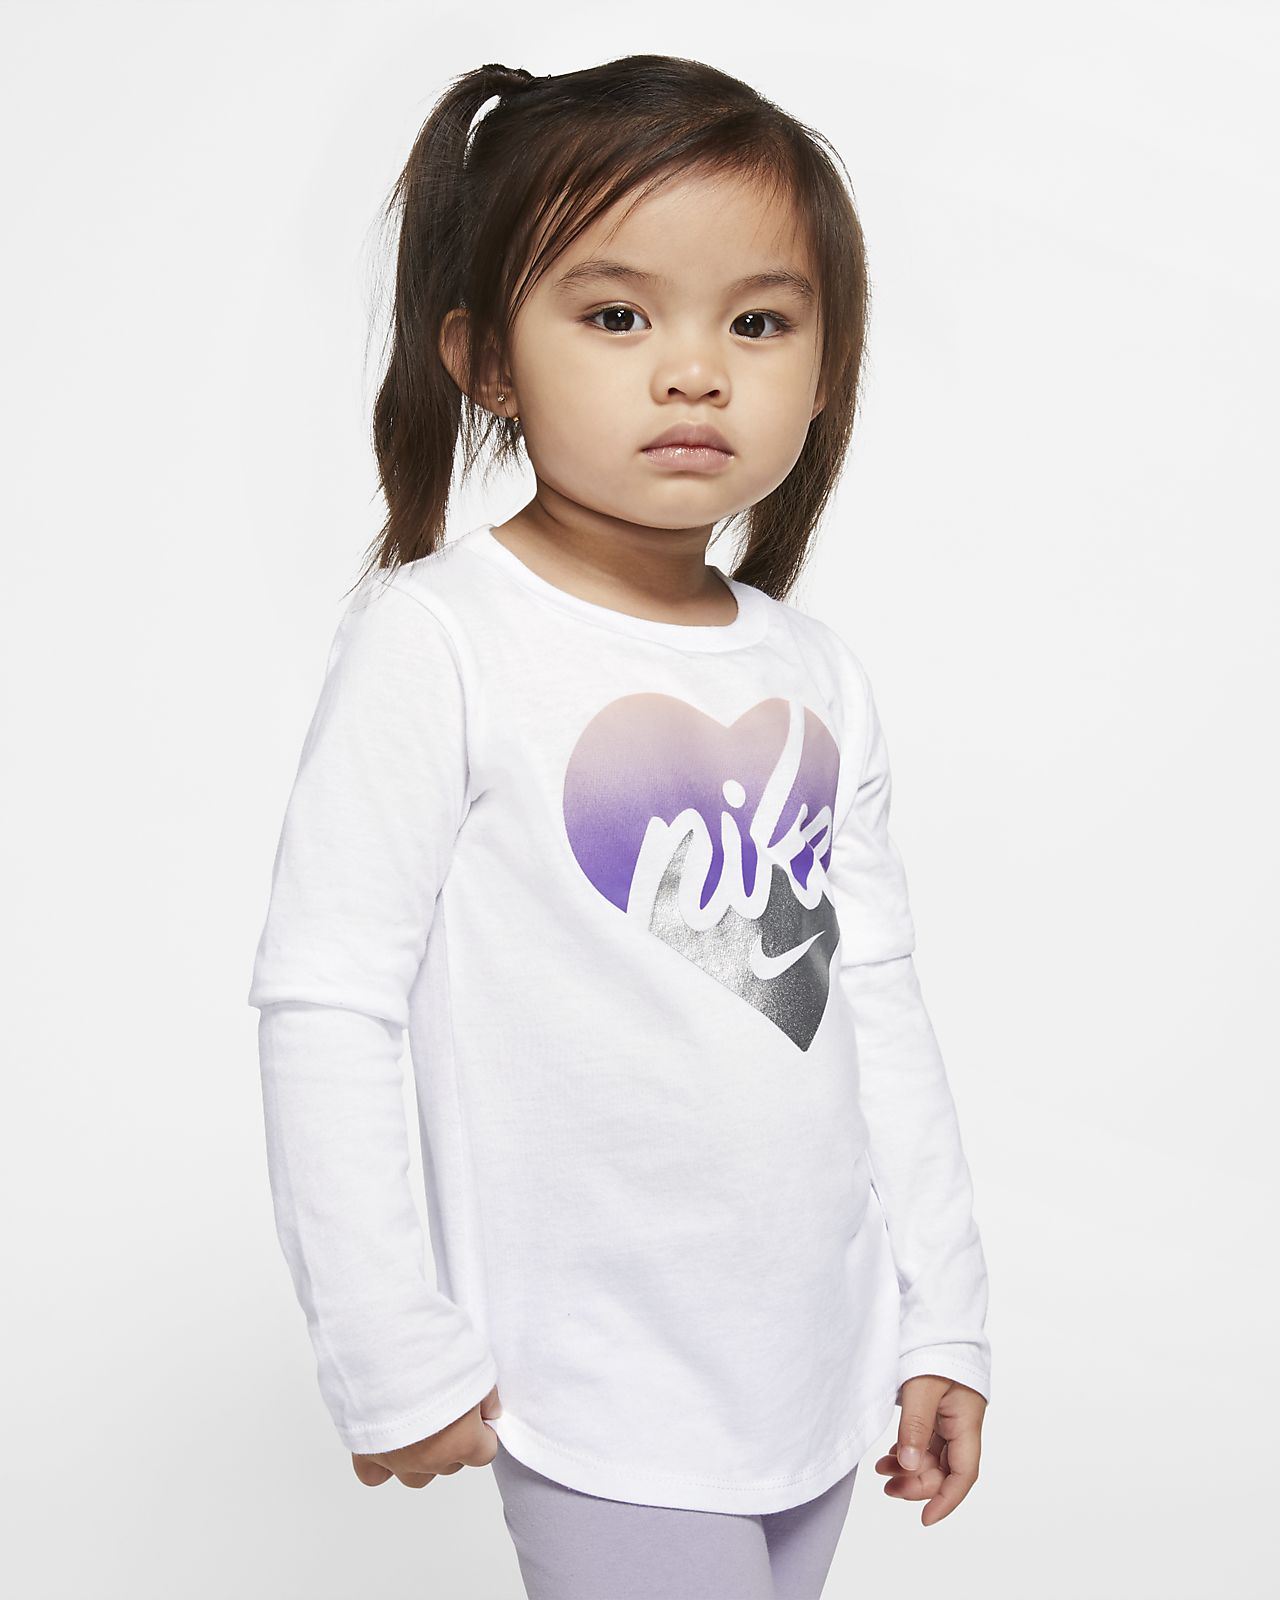 toddler girl nike clothes clearance